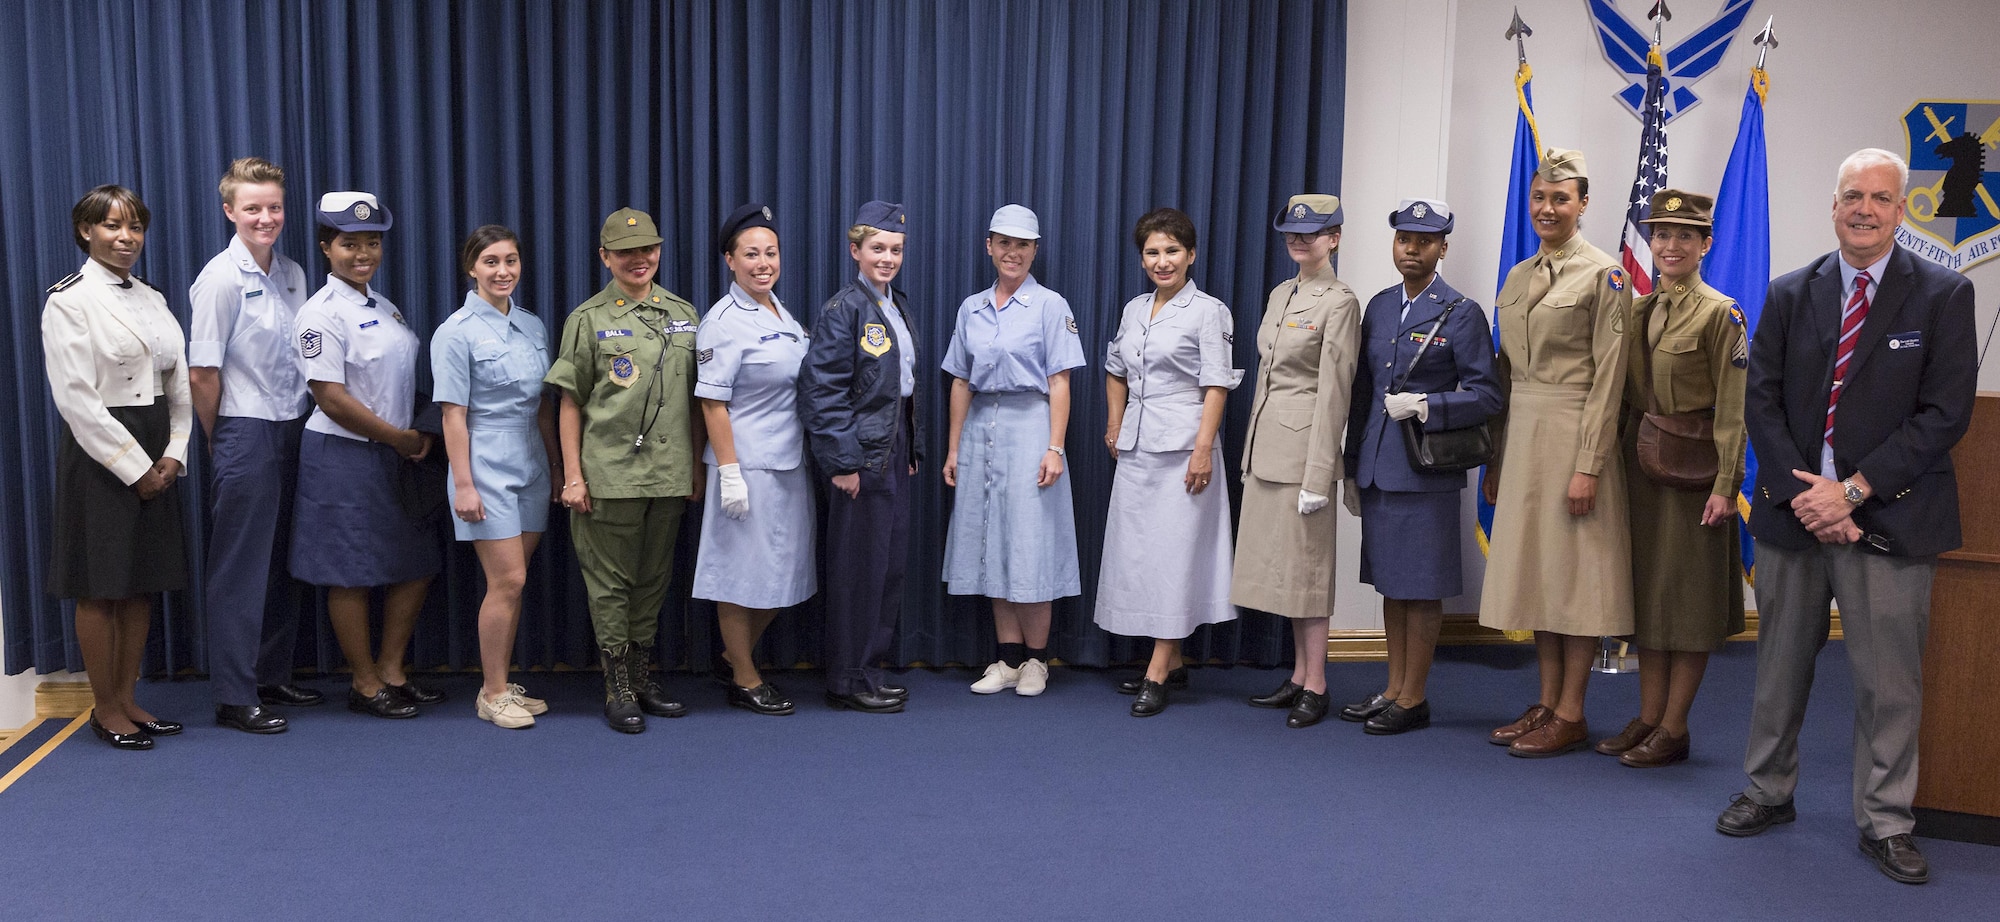 Lt. Col. (retired) David Shultz, right, stands with the 25 AF volunteers who modeled U.S. Air Force women’s vintage uniforms during the Women’s History Month event March 28. Shultz owns and curates the uniforms as part of his Air Force heritage exhibit, some of which is displayed at the Texas Air Museum on Stinson Field, San Antonio, Texas. (U.S. Air Force Photo/Guido Locati, 25 AF/PA)
